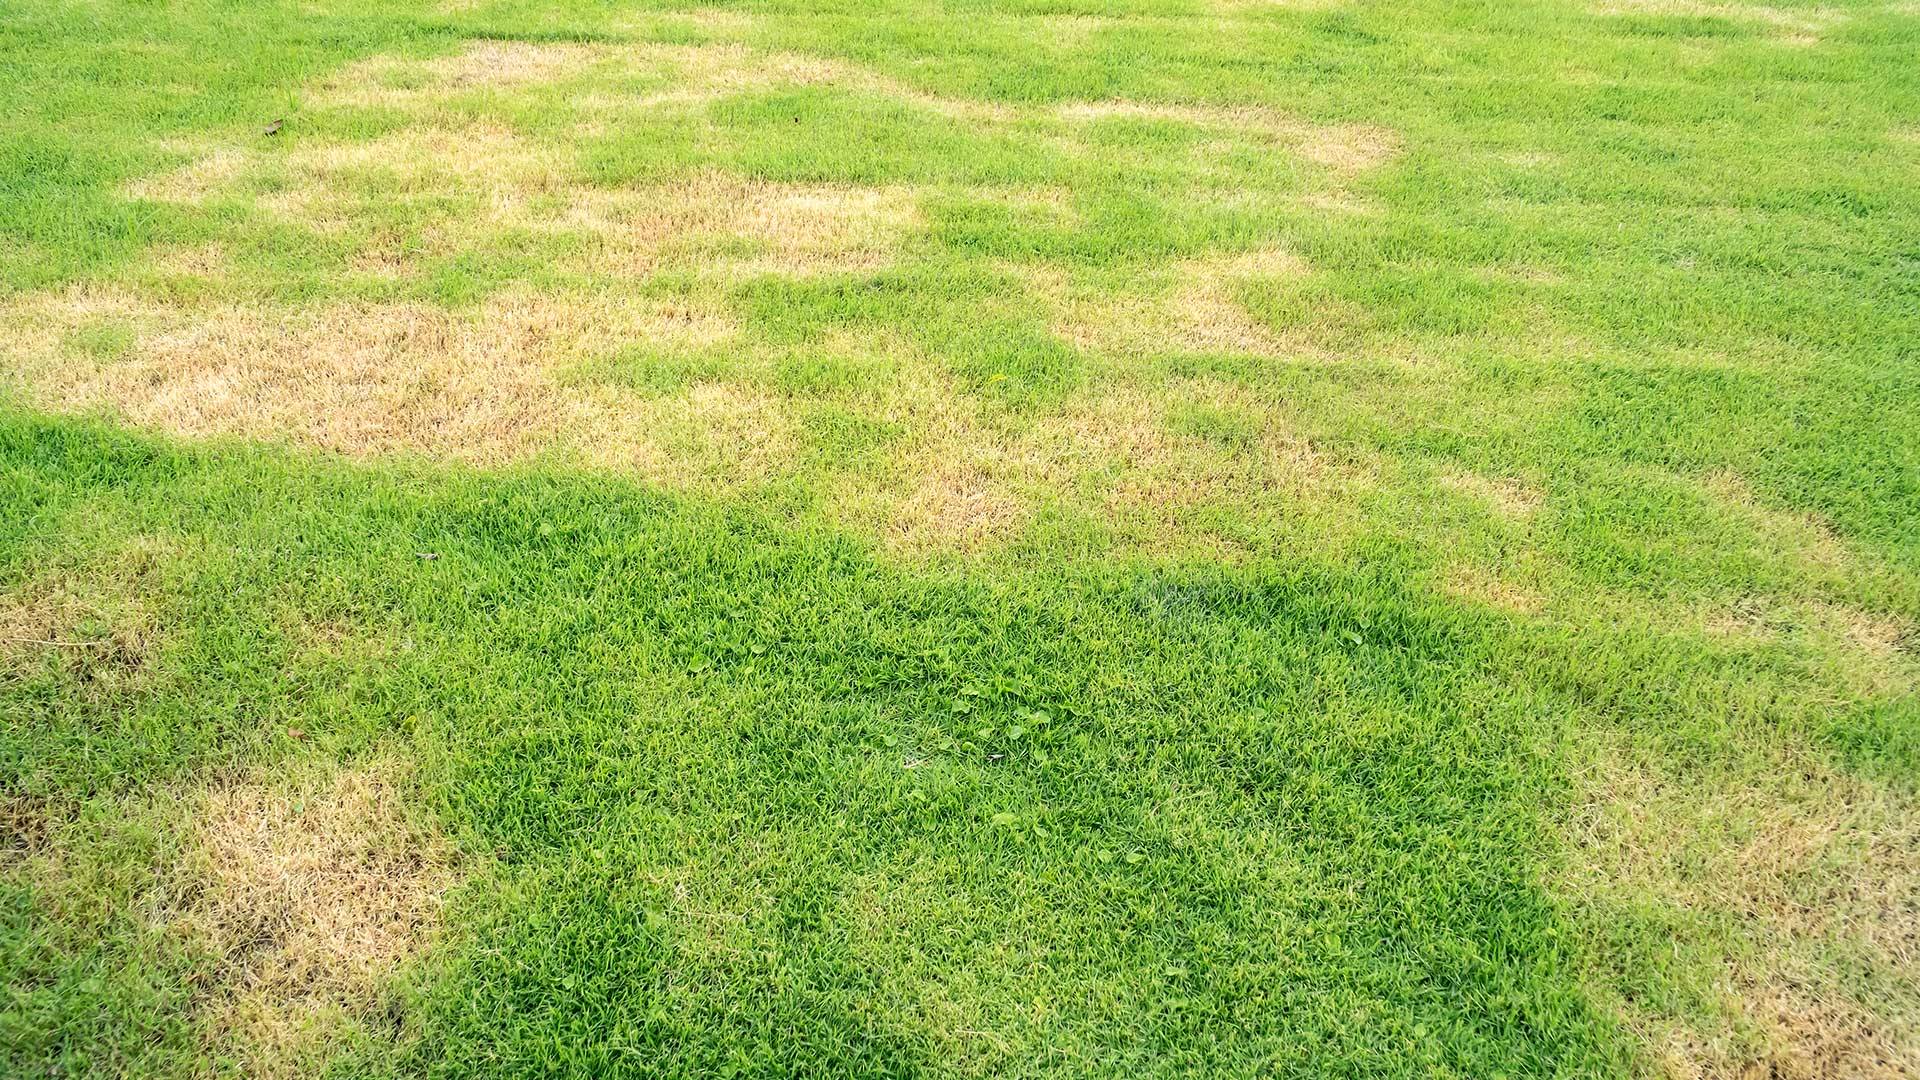 Large lawn with dead spots caused by lawn disease and invasive insects.